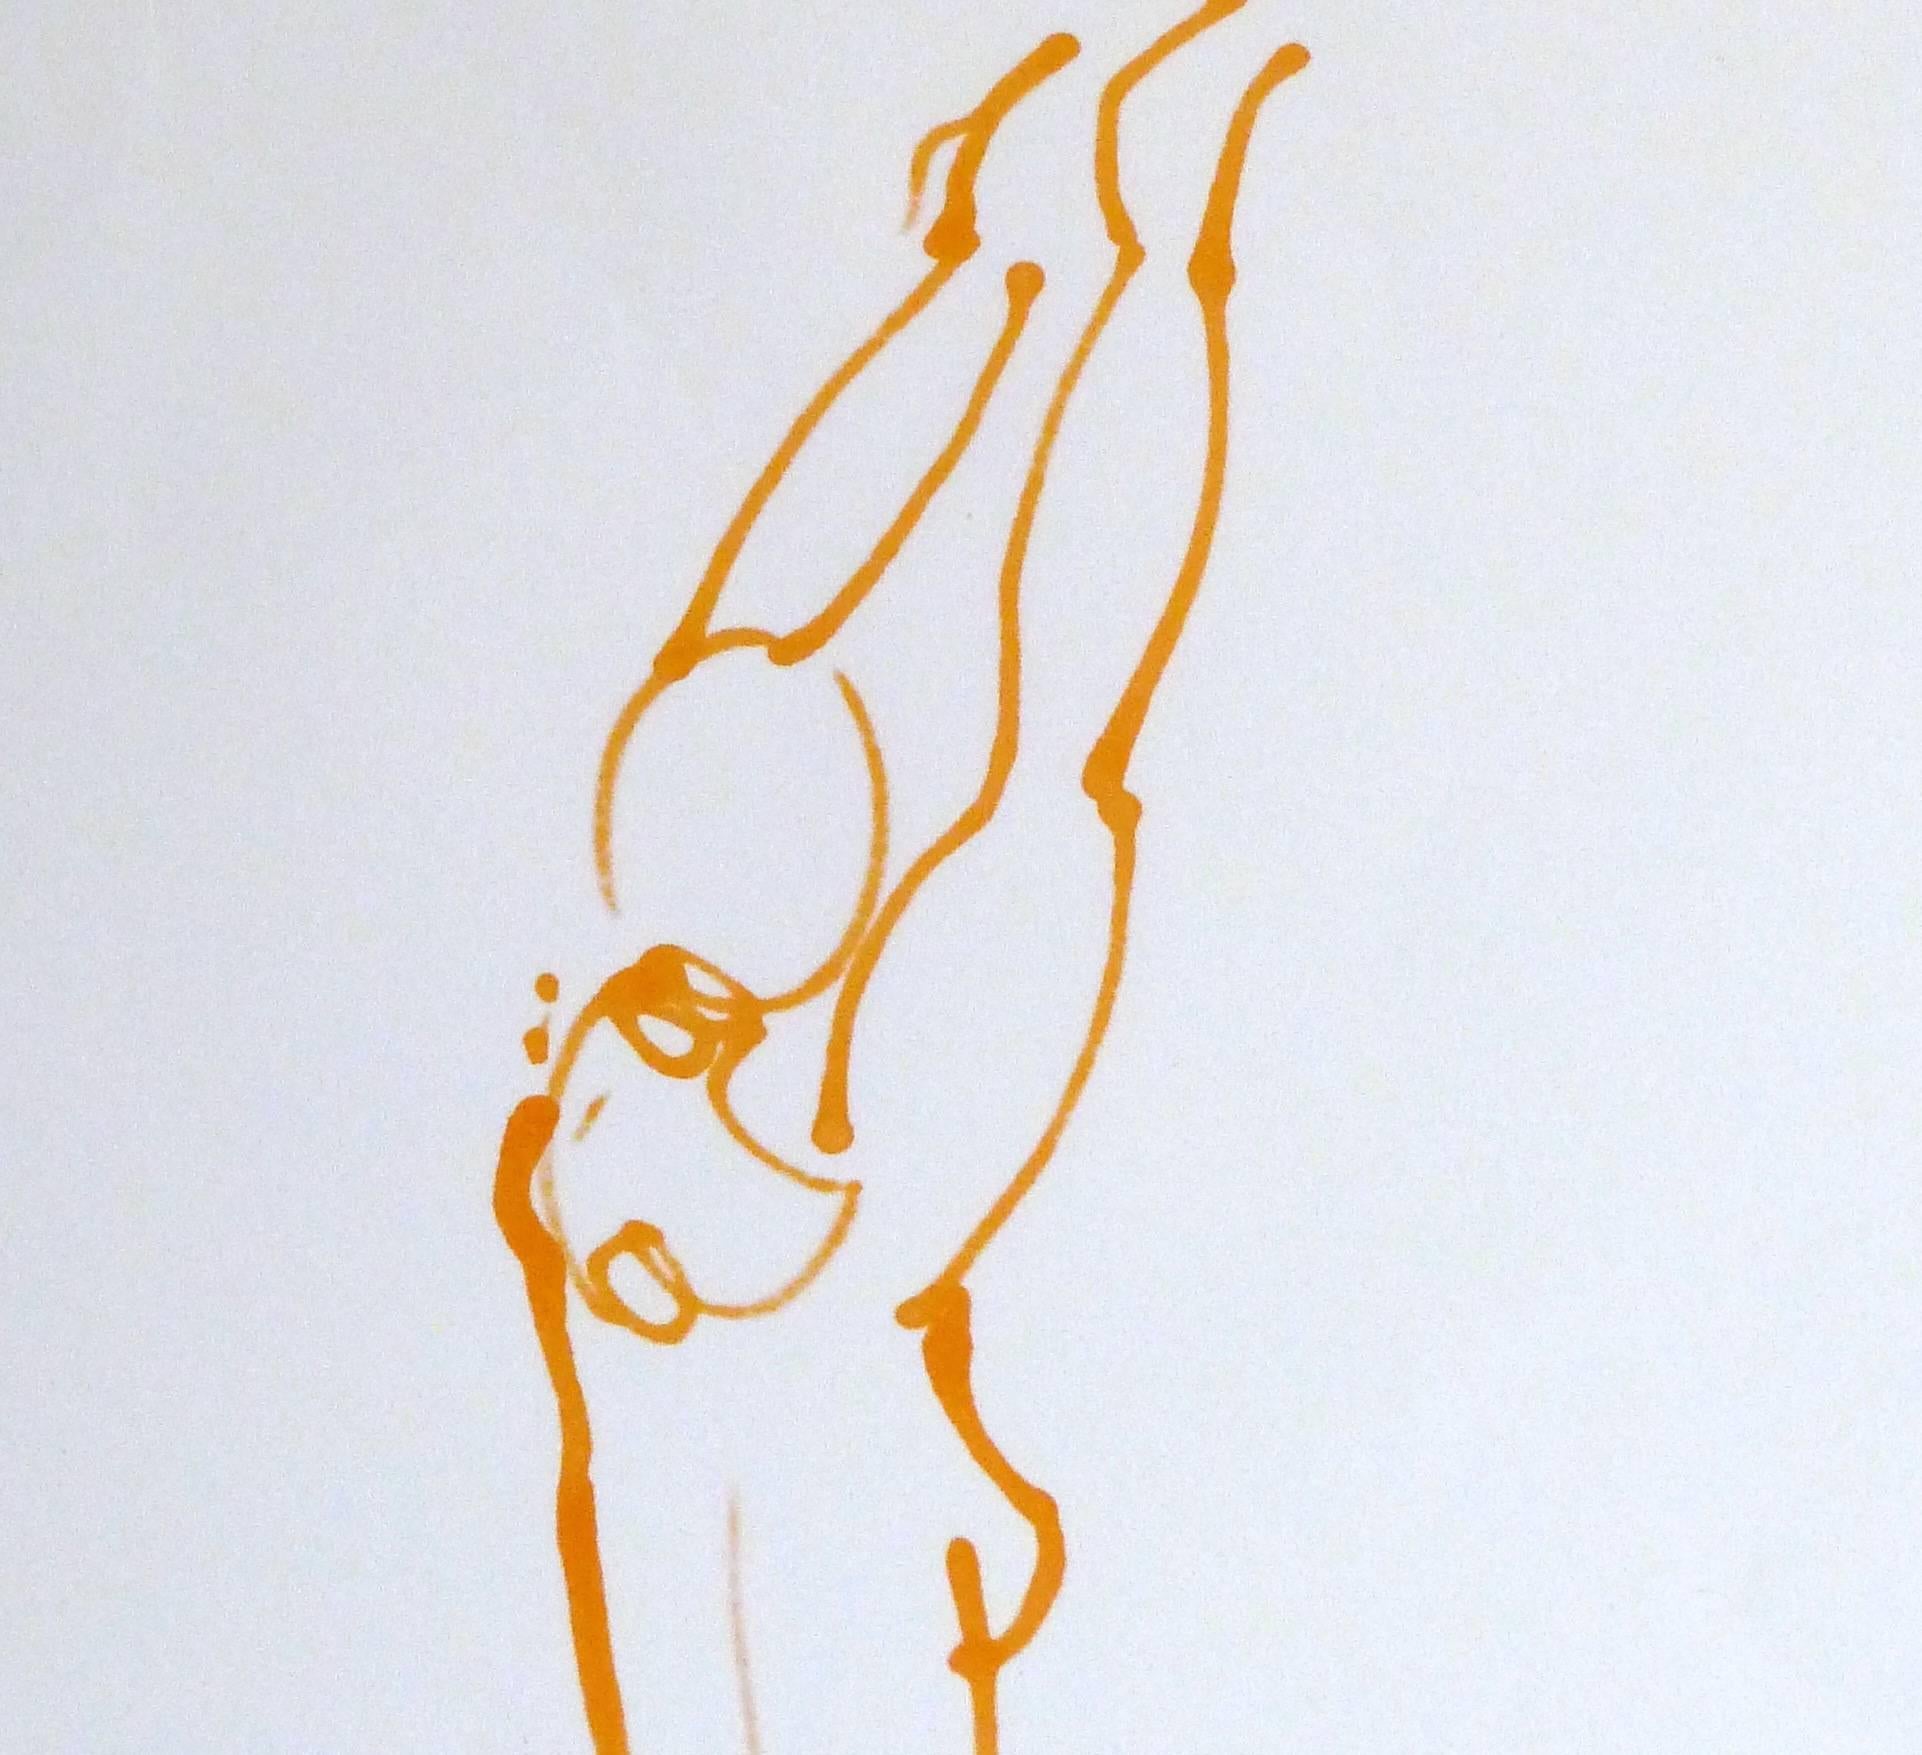 French ink sketch of a nude female figure standing and stretching in a bright orange hue by French-Japanese artist Kei Mitsuuchi (1948-2001), circa 1990

Original artwork on paper displayed on a white mat with a gold border. Archival plastic sleeve